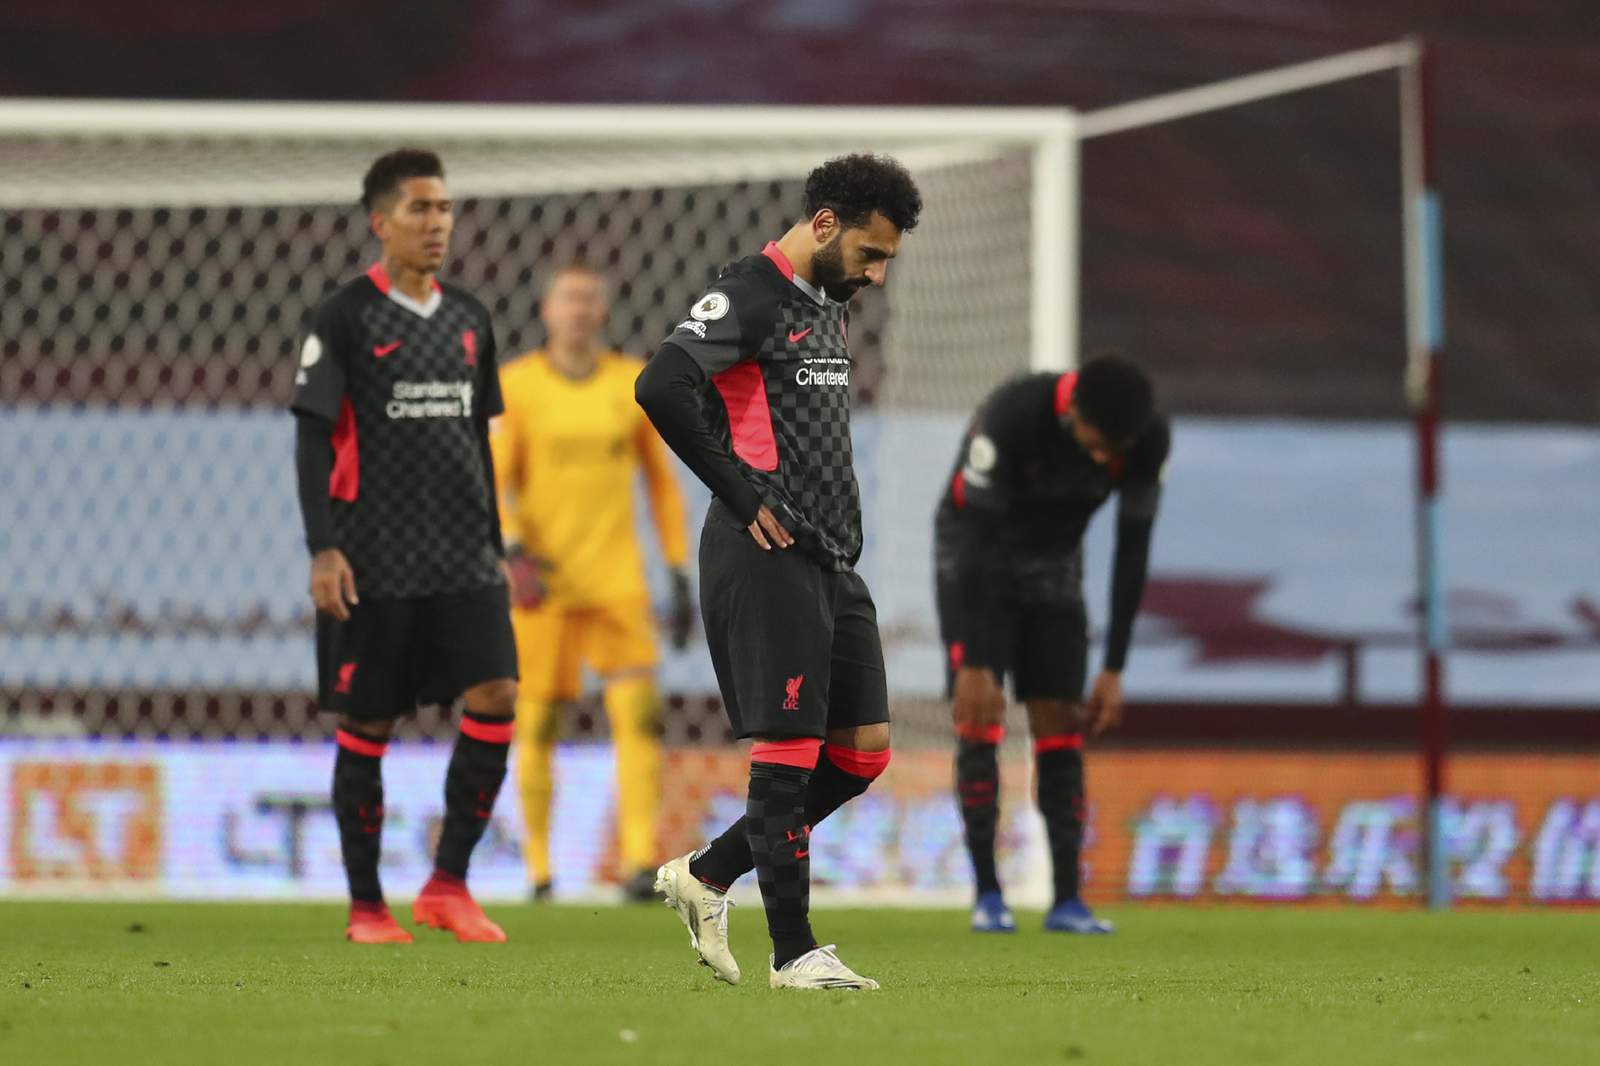 Liverpool embarrassed in 7-2 loss to Aston Villa in EPL